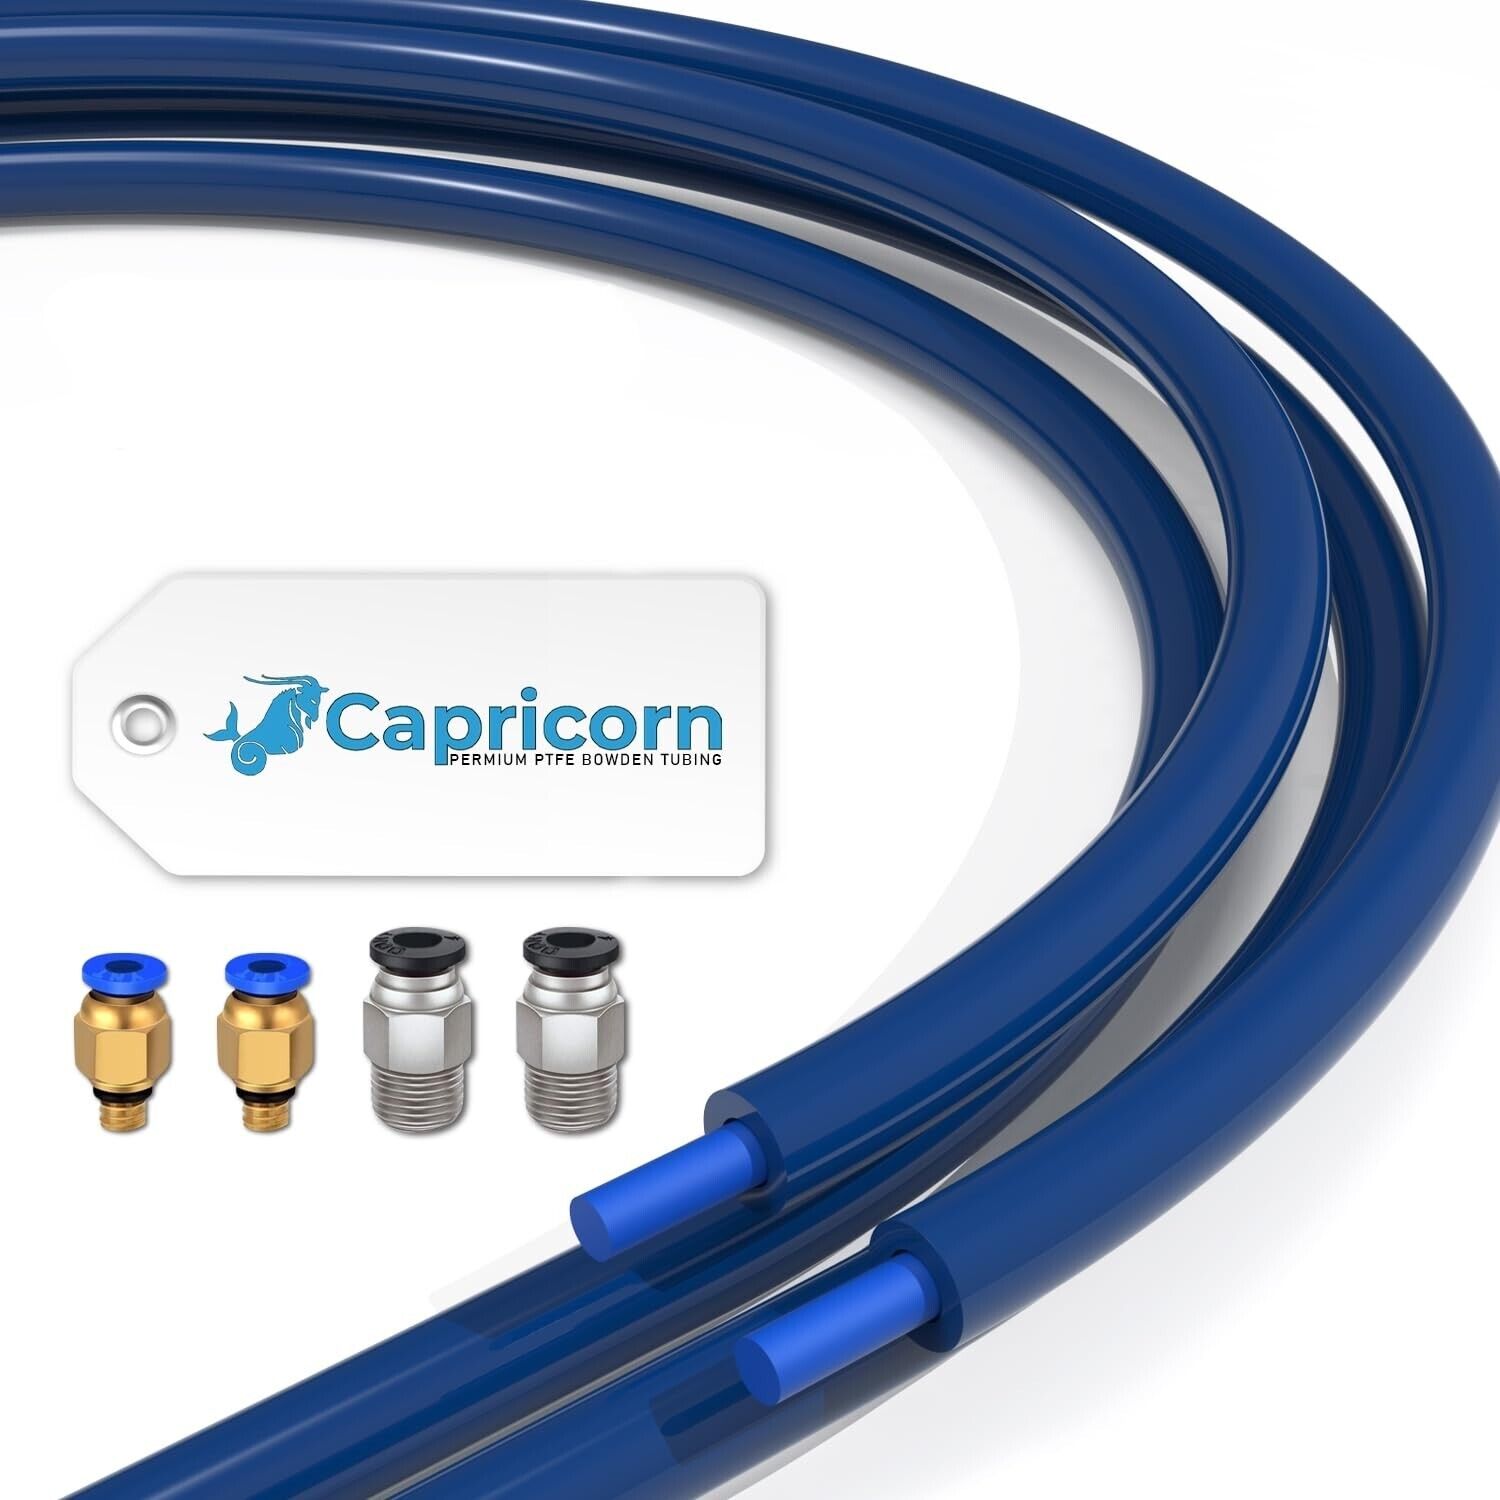 Creality Capricorn Bowden Tubing 1M, Bowden PTFE Tube for 1.75mm Filament wit...